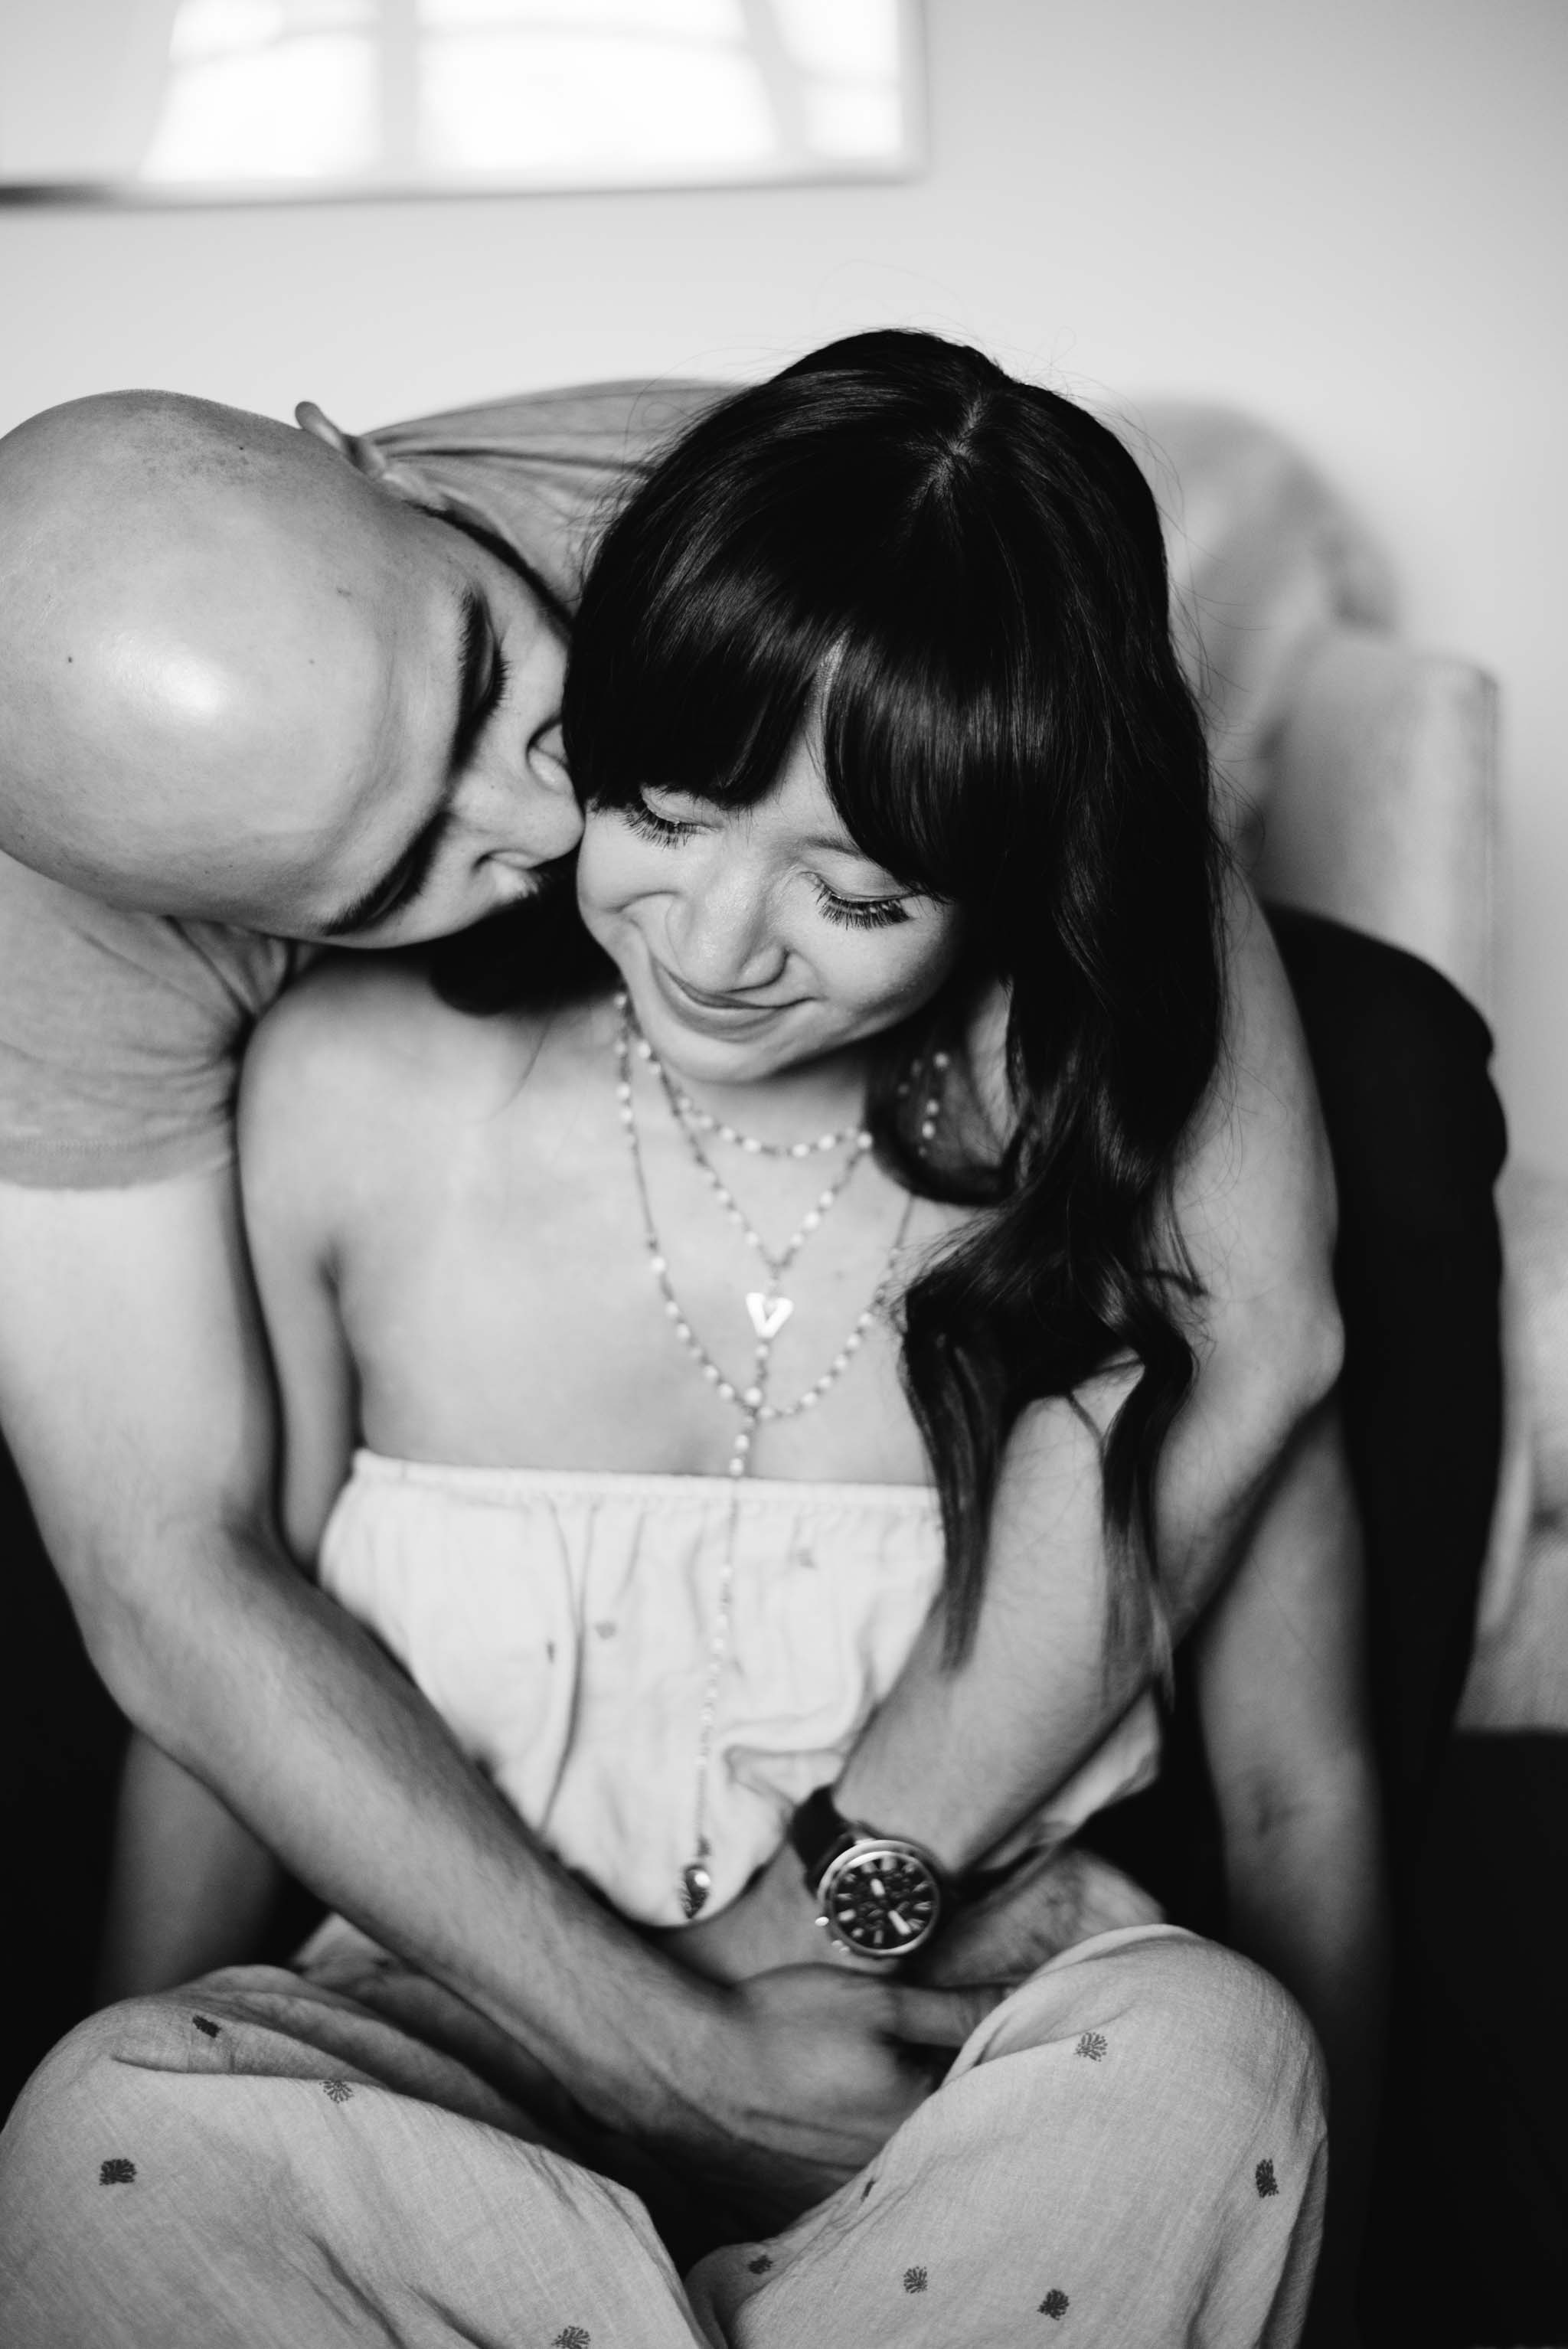 In-Home Engagement Session | Olive Photography Toronto